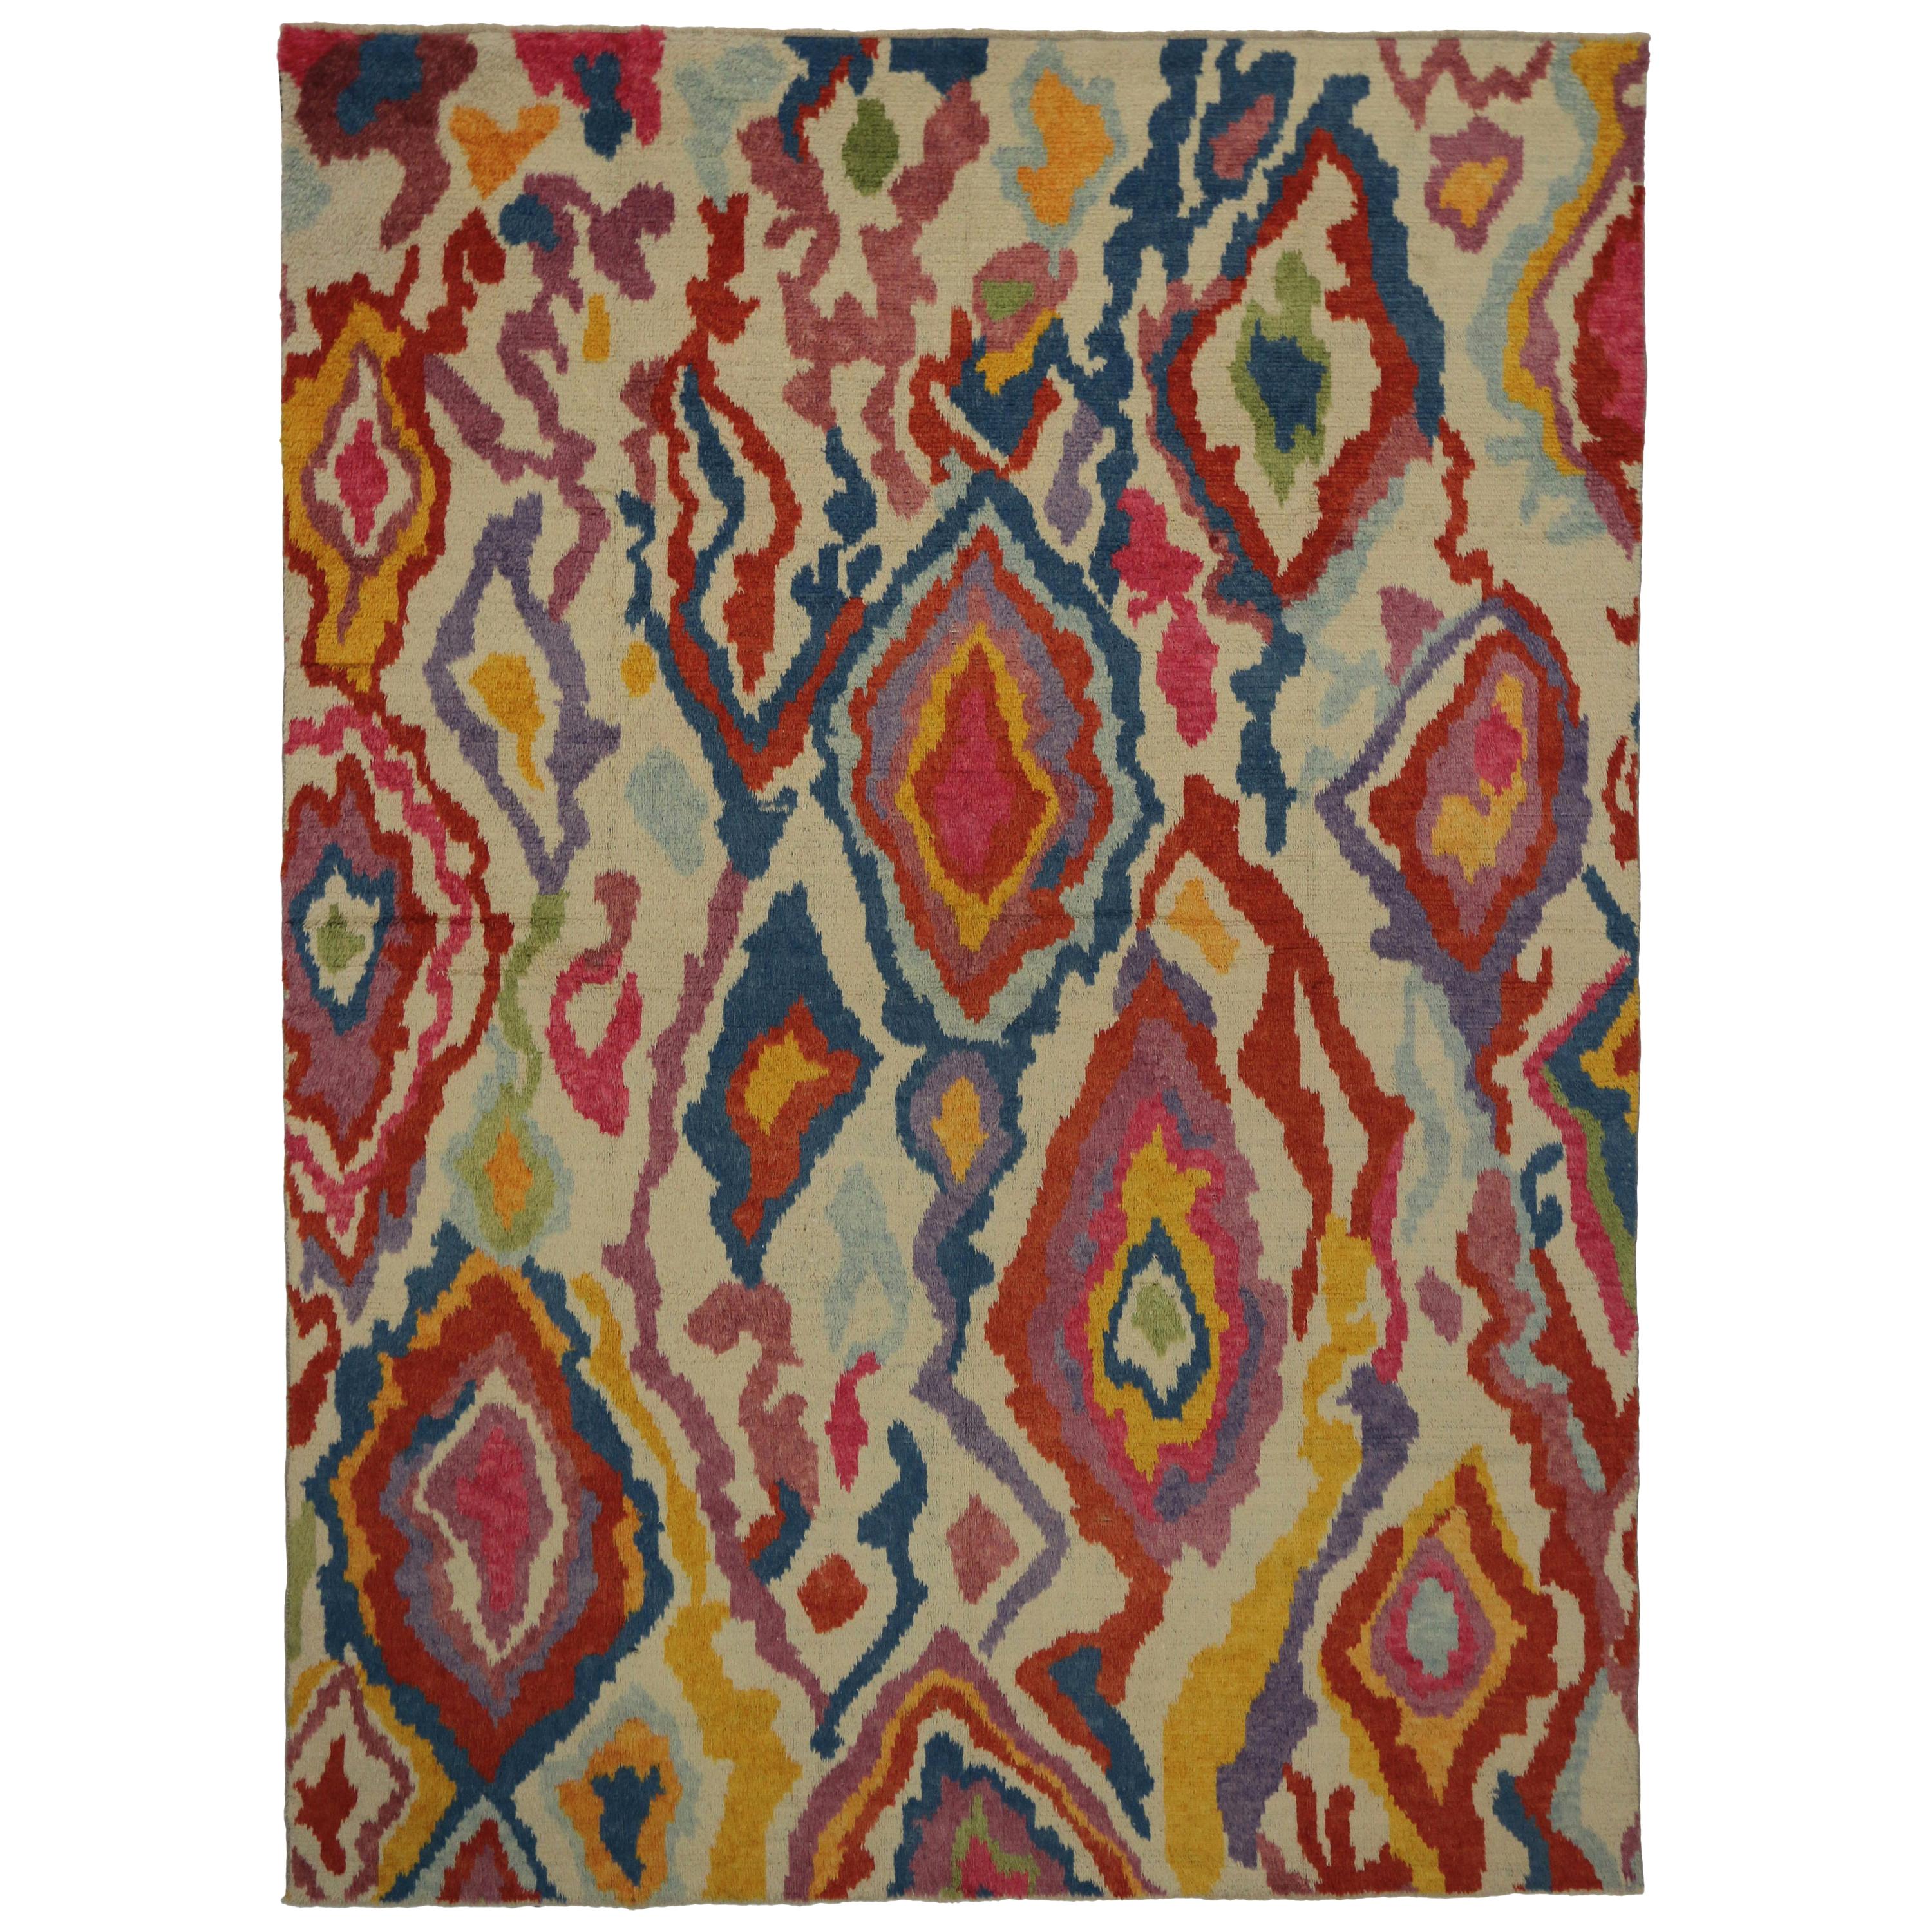 51863, new contemporary Tulu Shag rug Inspired by Judy Chicago & Georgia O'Keeffe. This hand knotted wool contemporary Tulu shag area rug with Postmodern style features a bold all-over geometric pattern composed of ambiguous organic shapes,